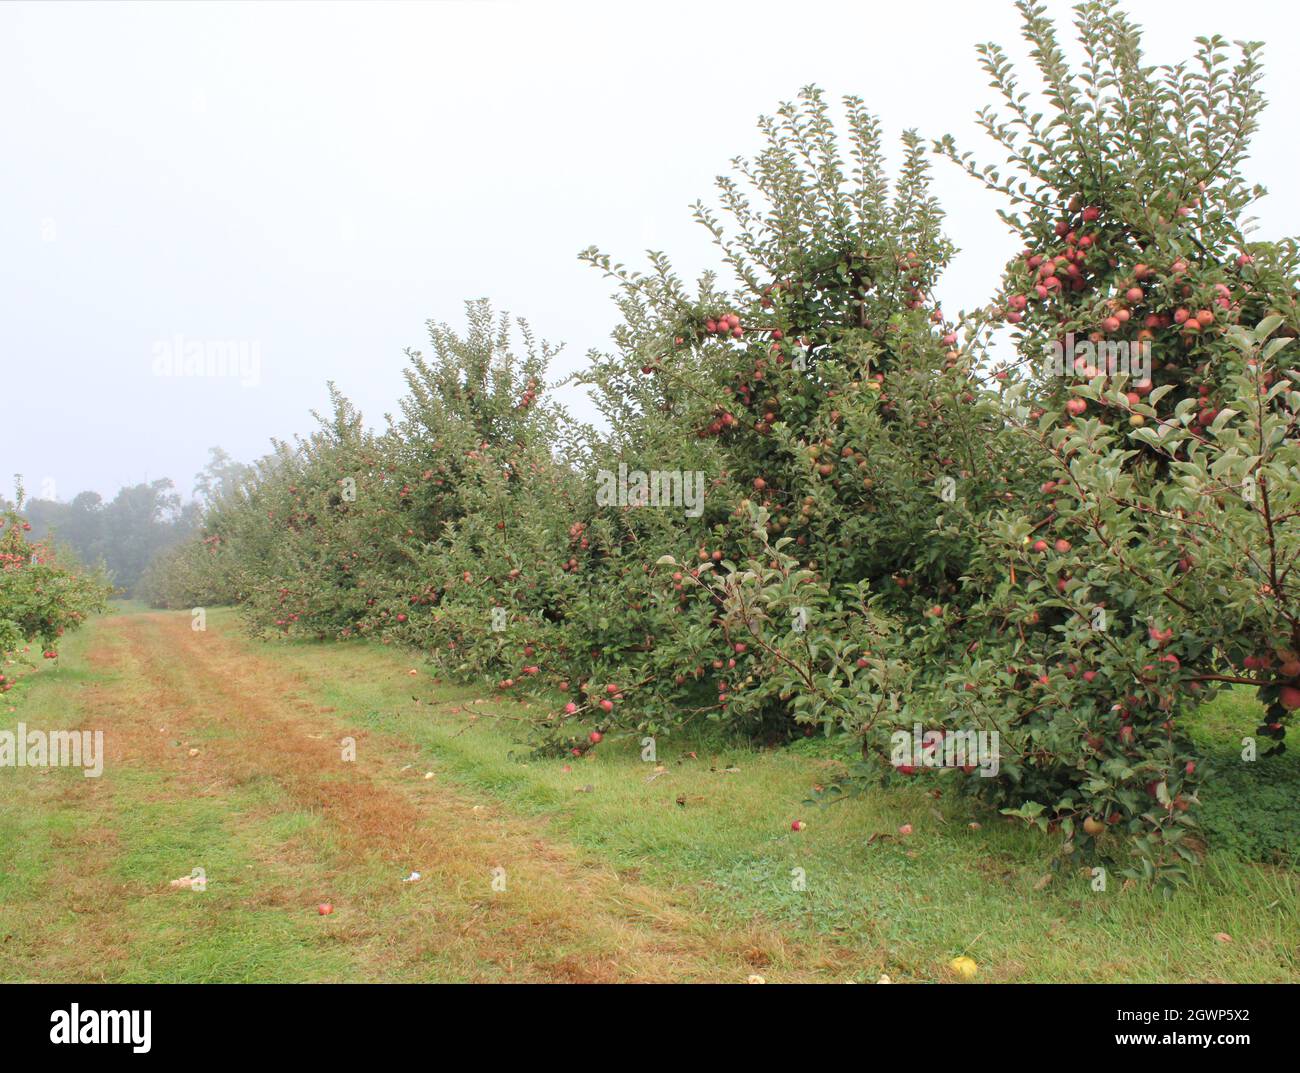 A Row of Stayman Winesap Apple Trees Stock Photo